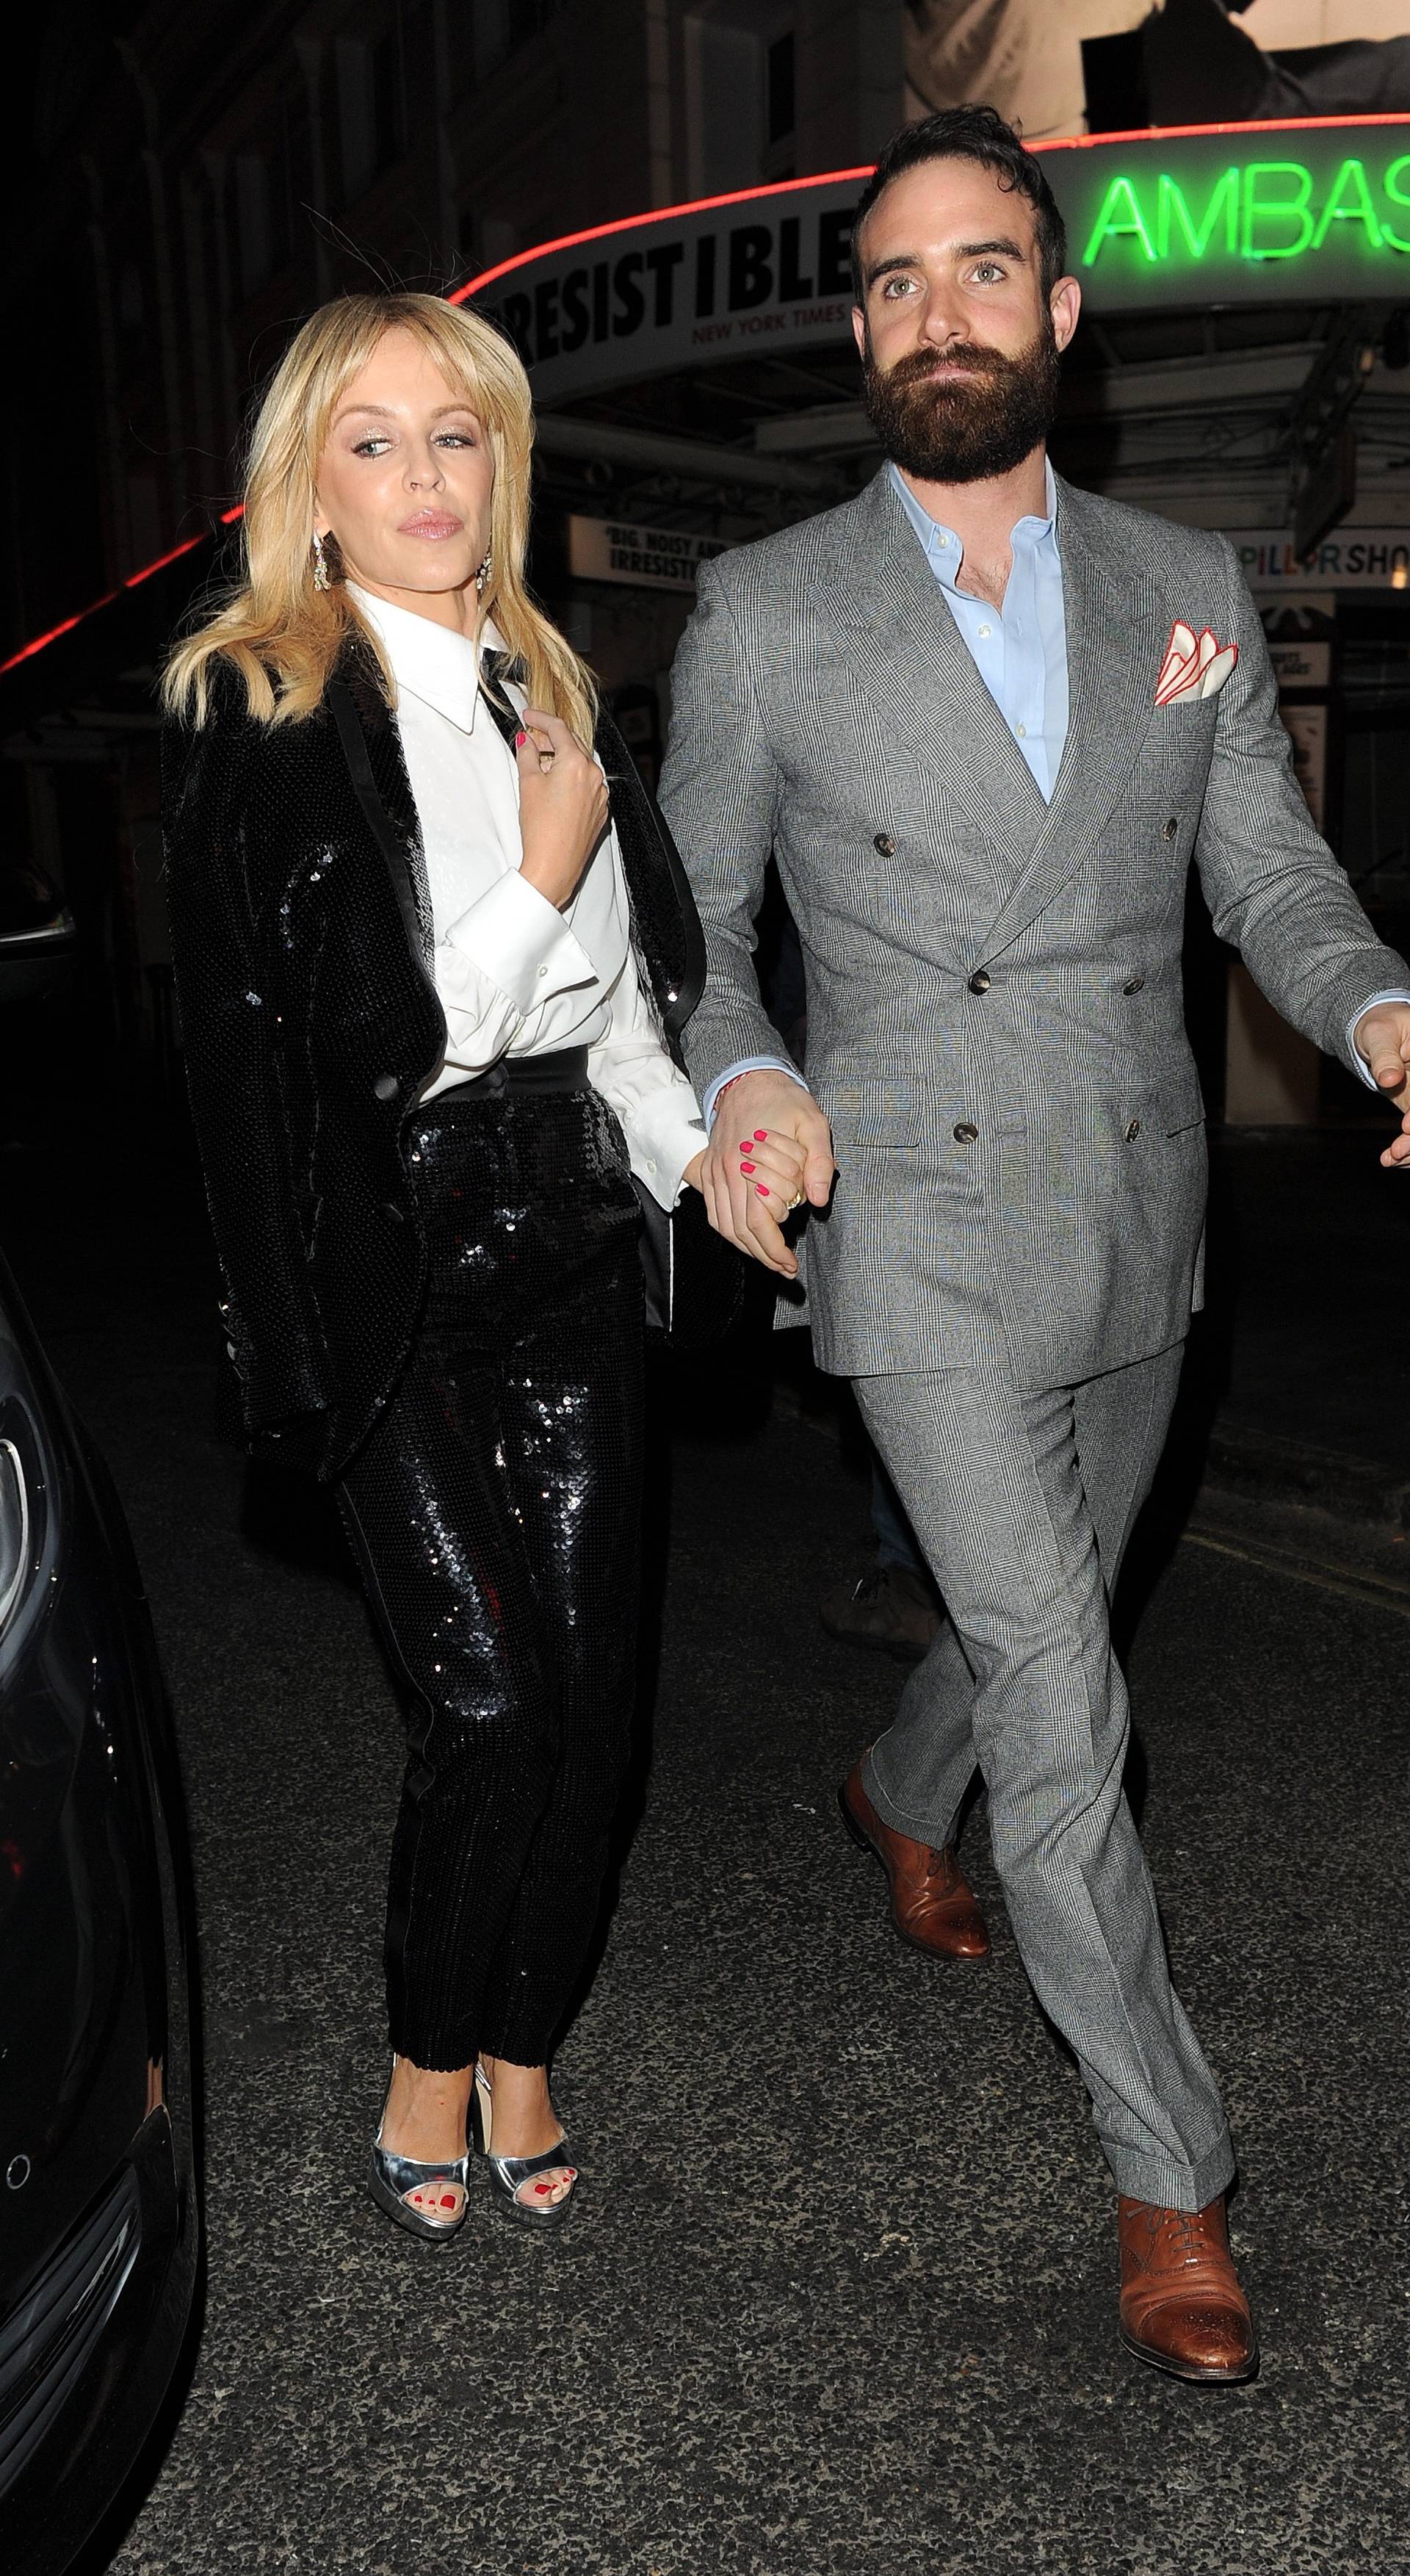 Celebrities Arrive At The Ivy In London For The Kylie Minogue Gig